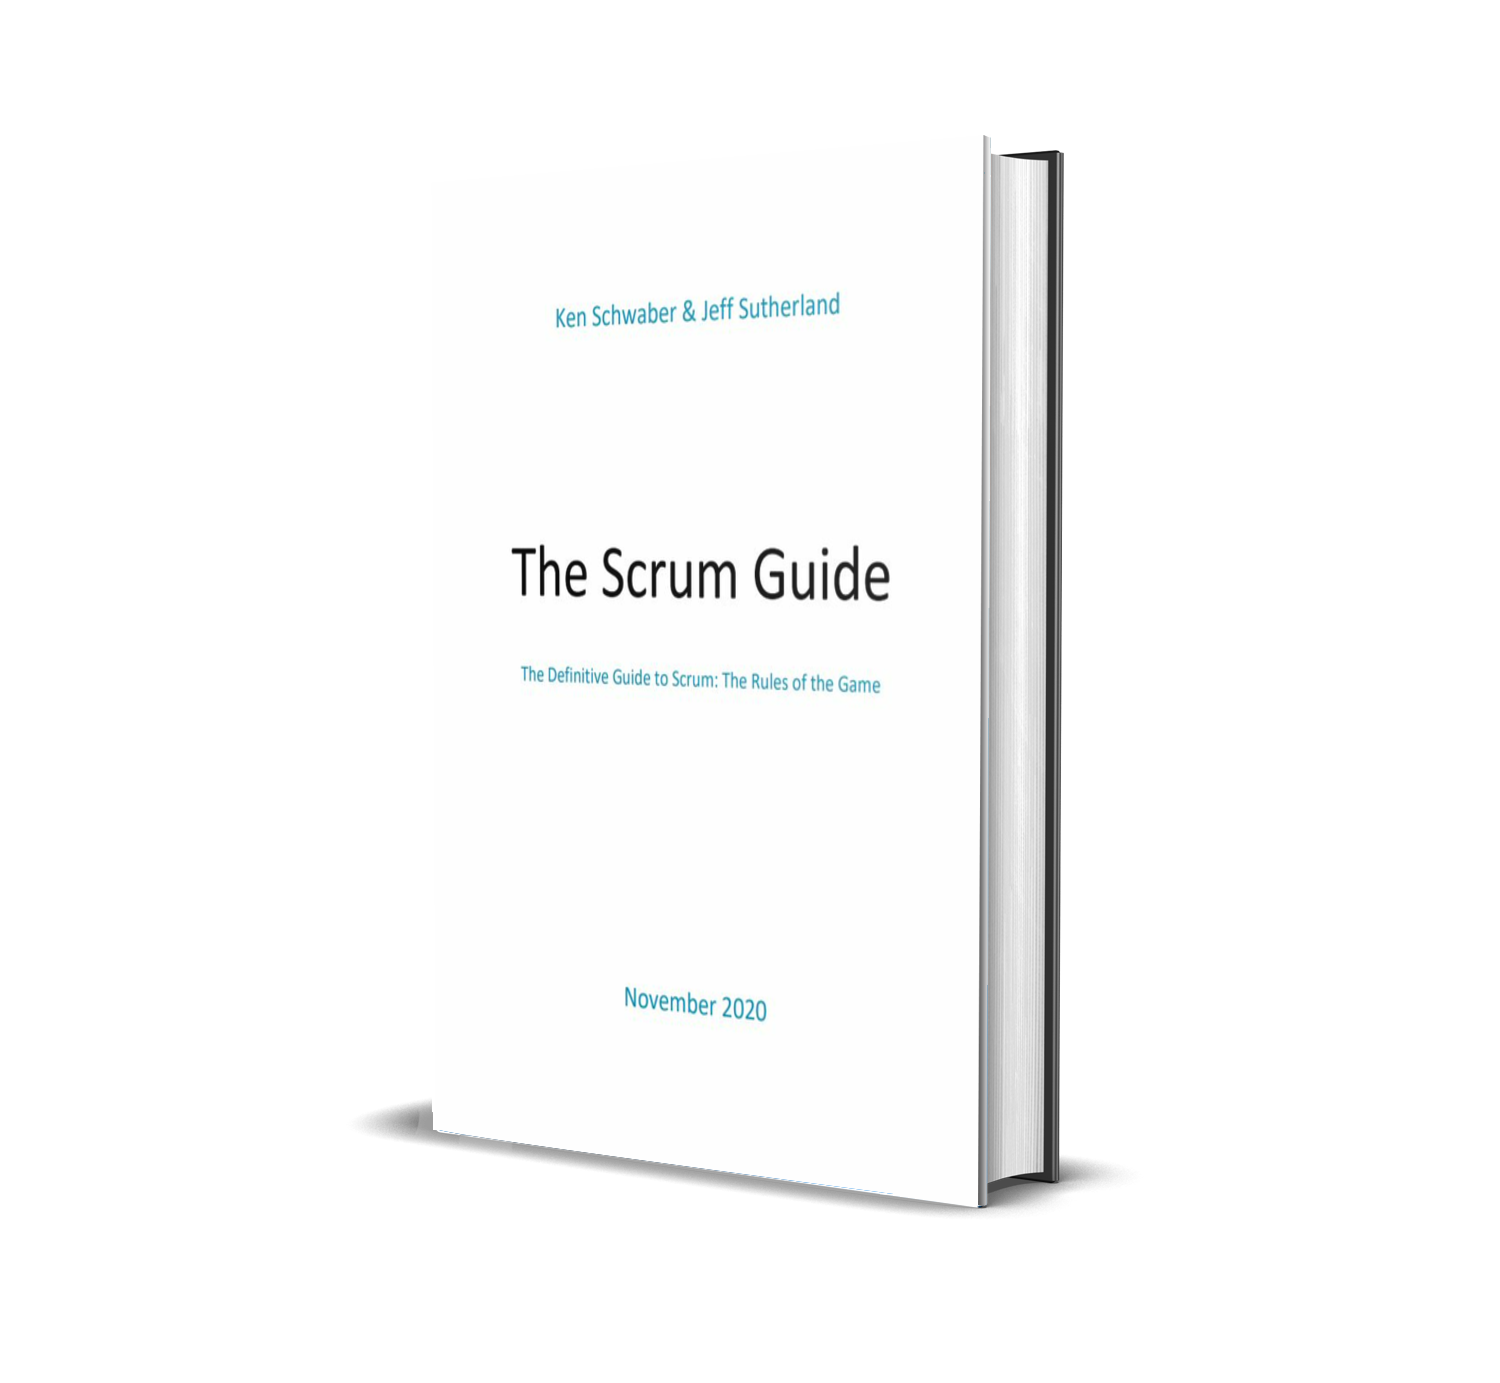 The cover of the Scrum Guide